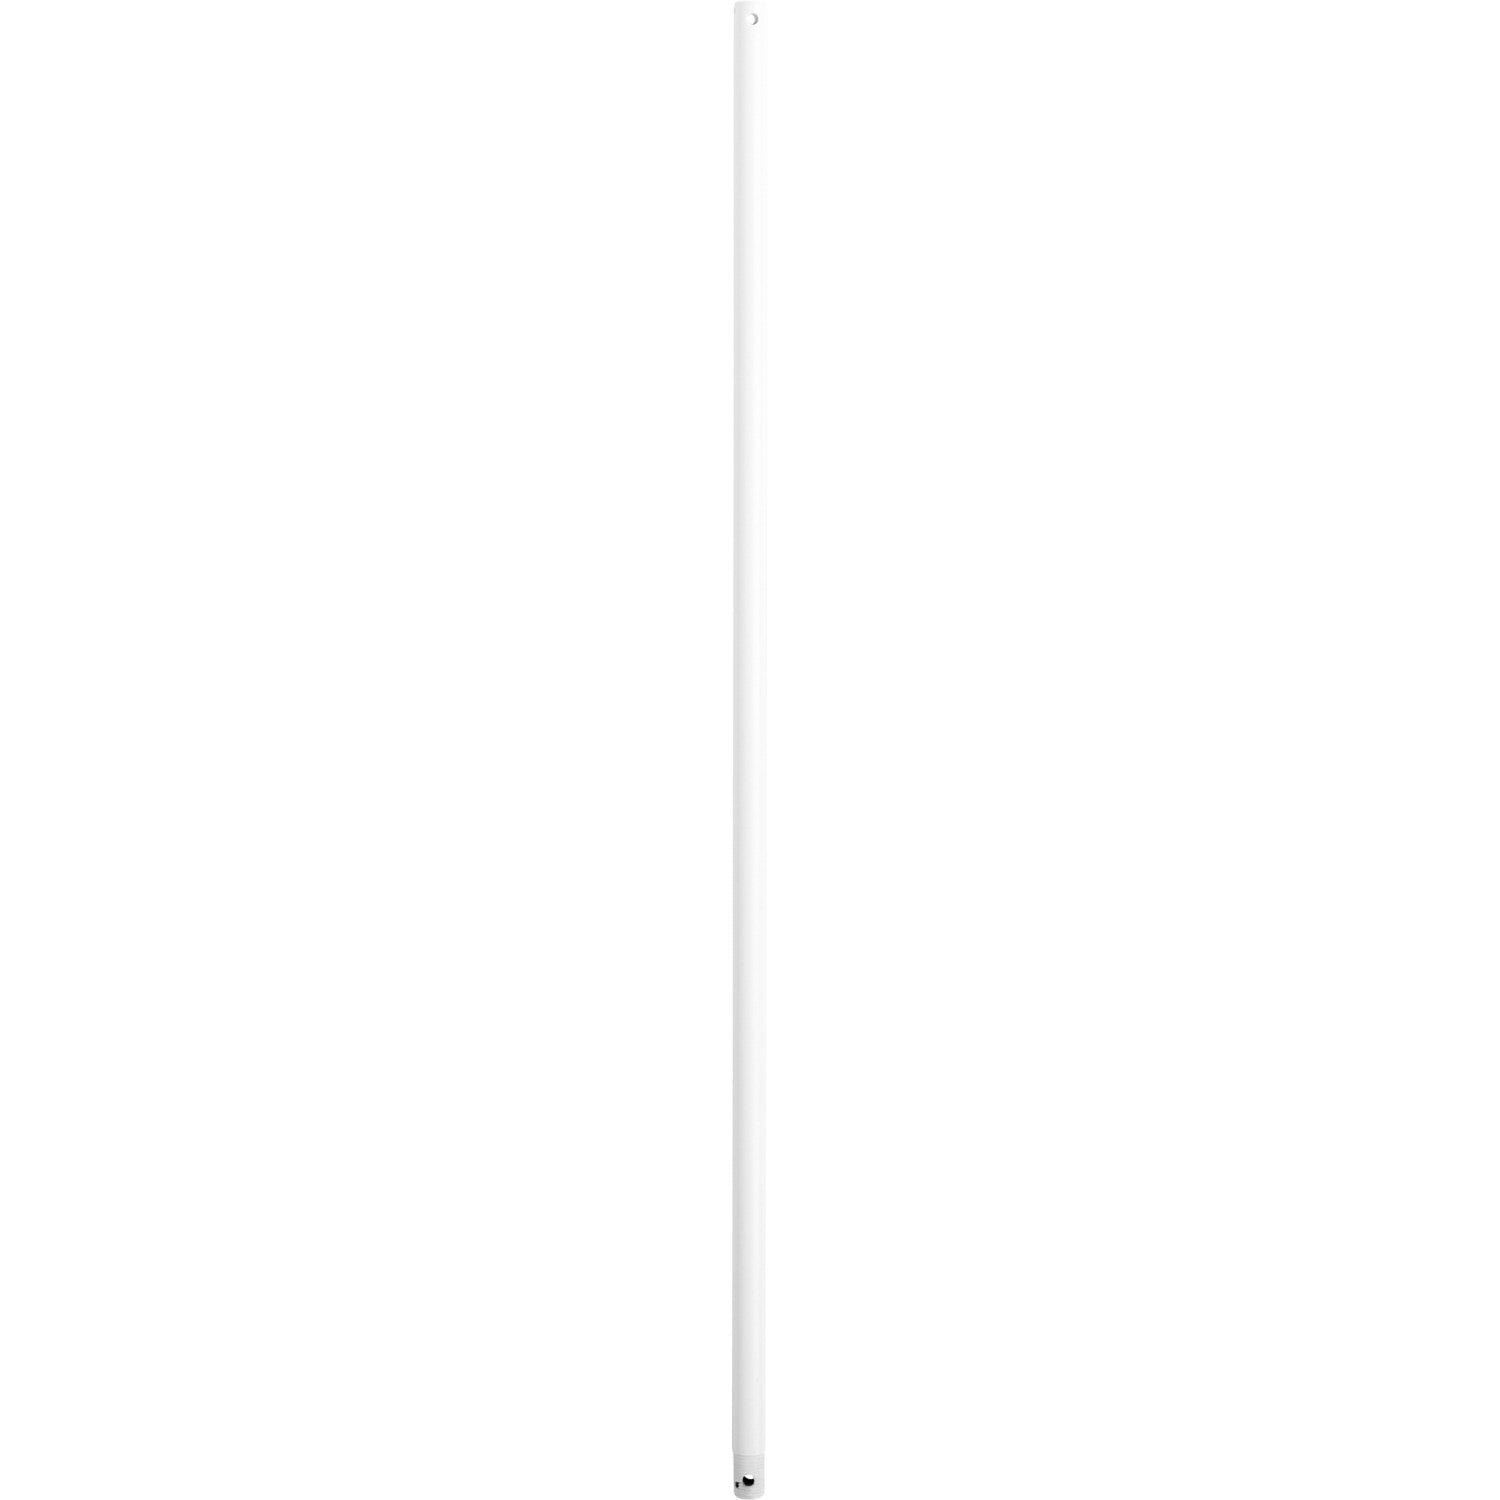 Quorum - 6-366 - Downrod - 36 in. Downrods - White